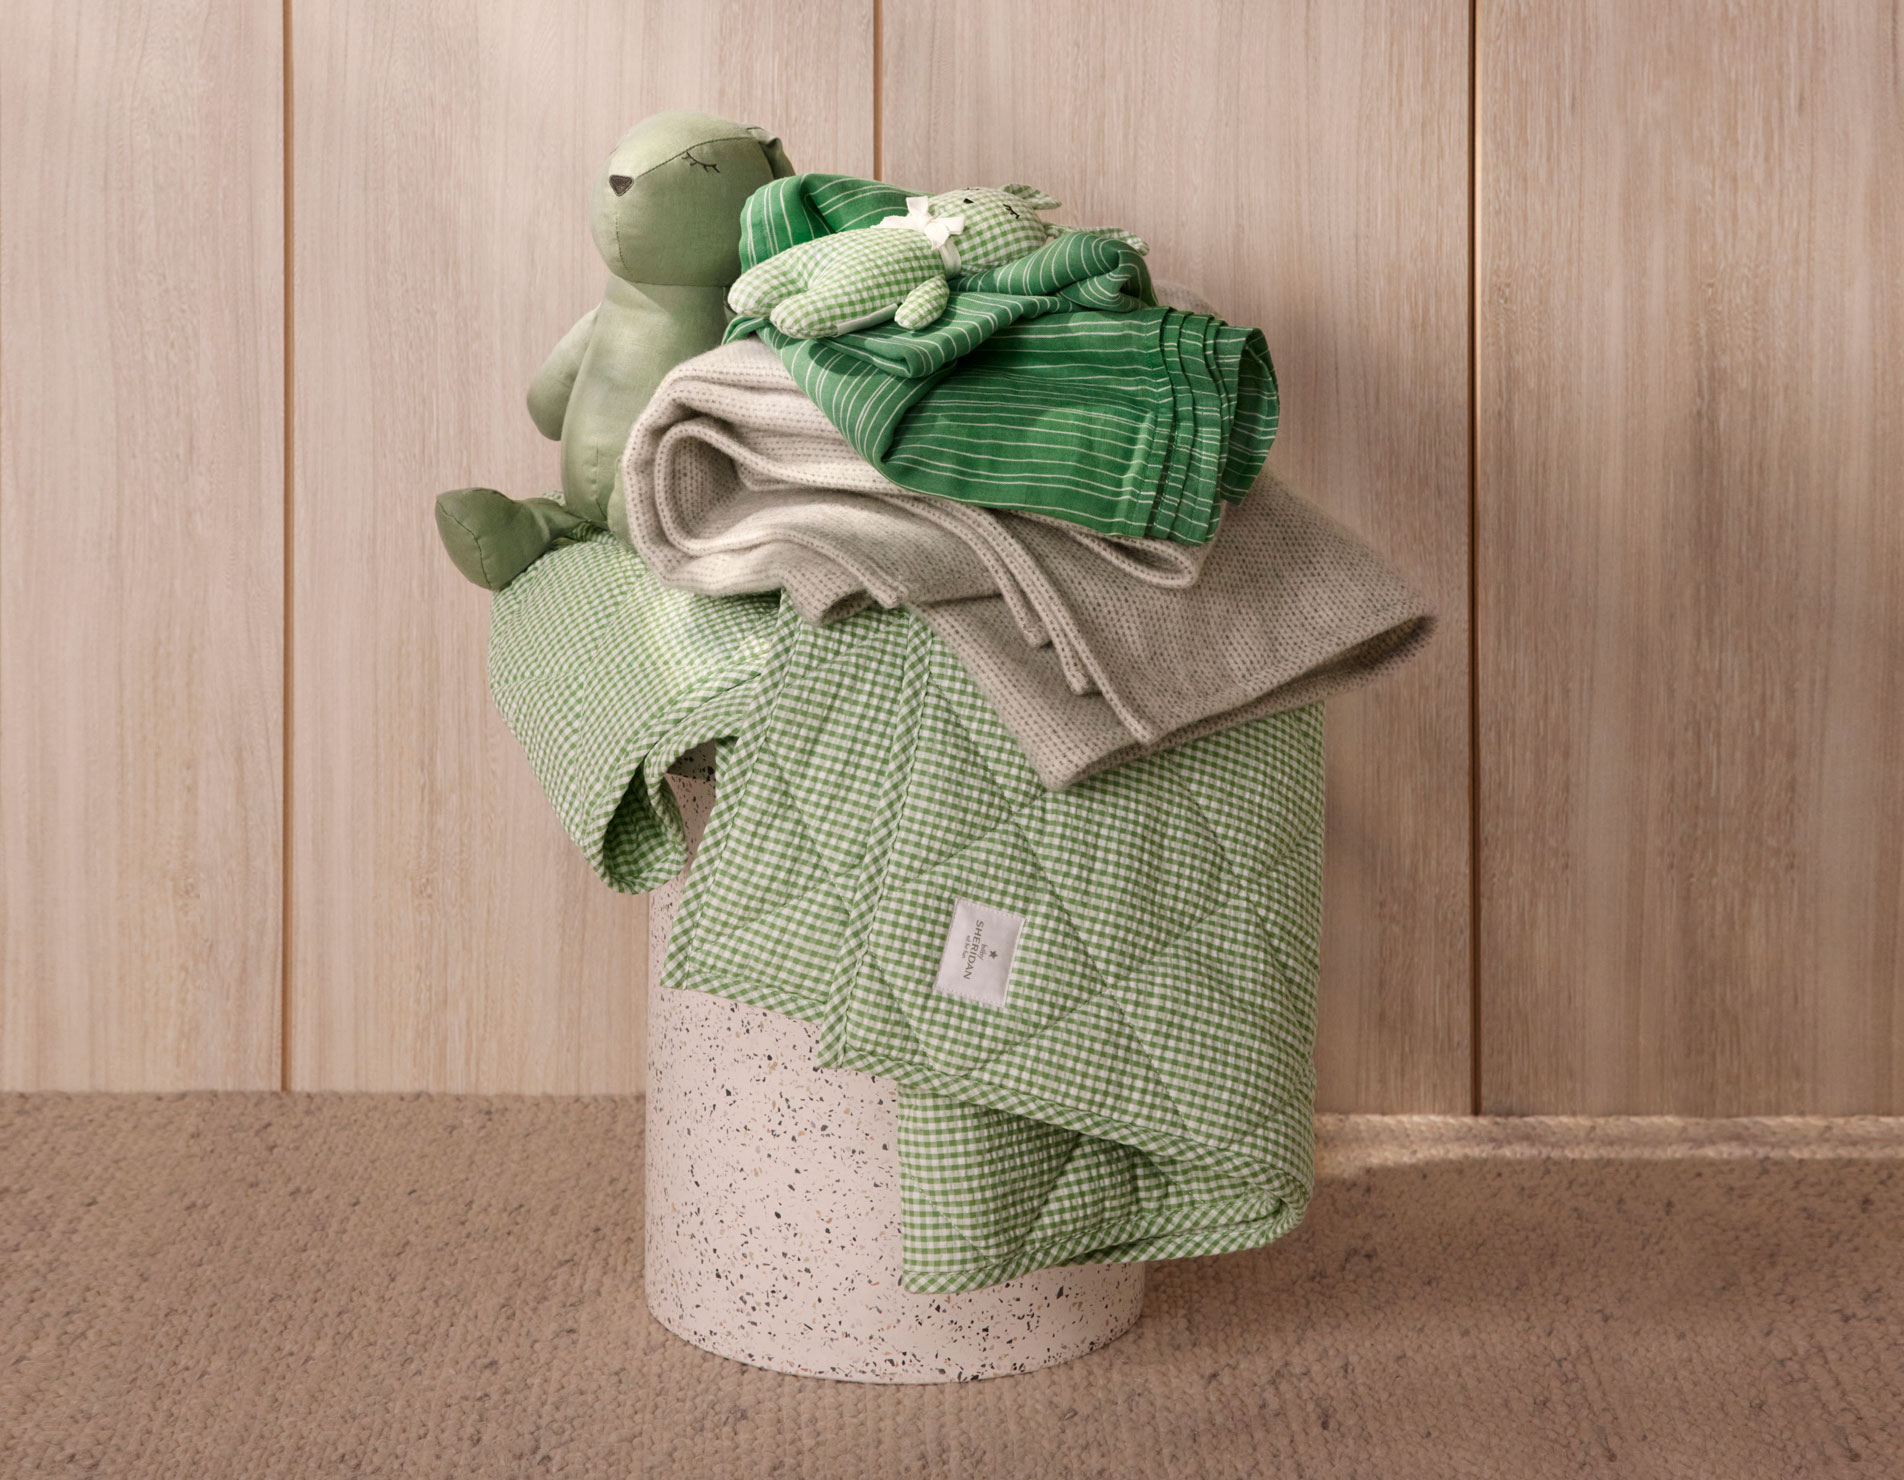 marble plinth on carpeted floor, with wood background. stacked on top is green checked baby blanket, grey wool knit blanket, striped green blanket, and two baby toys.